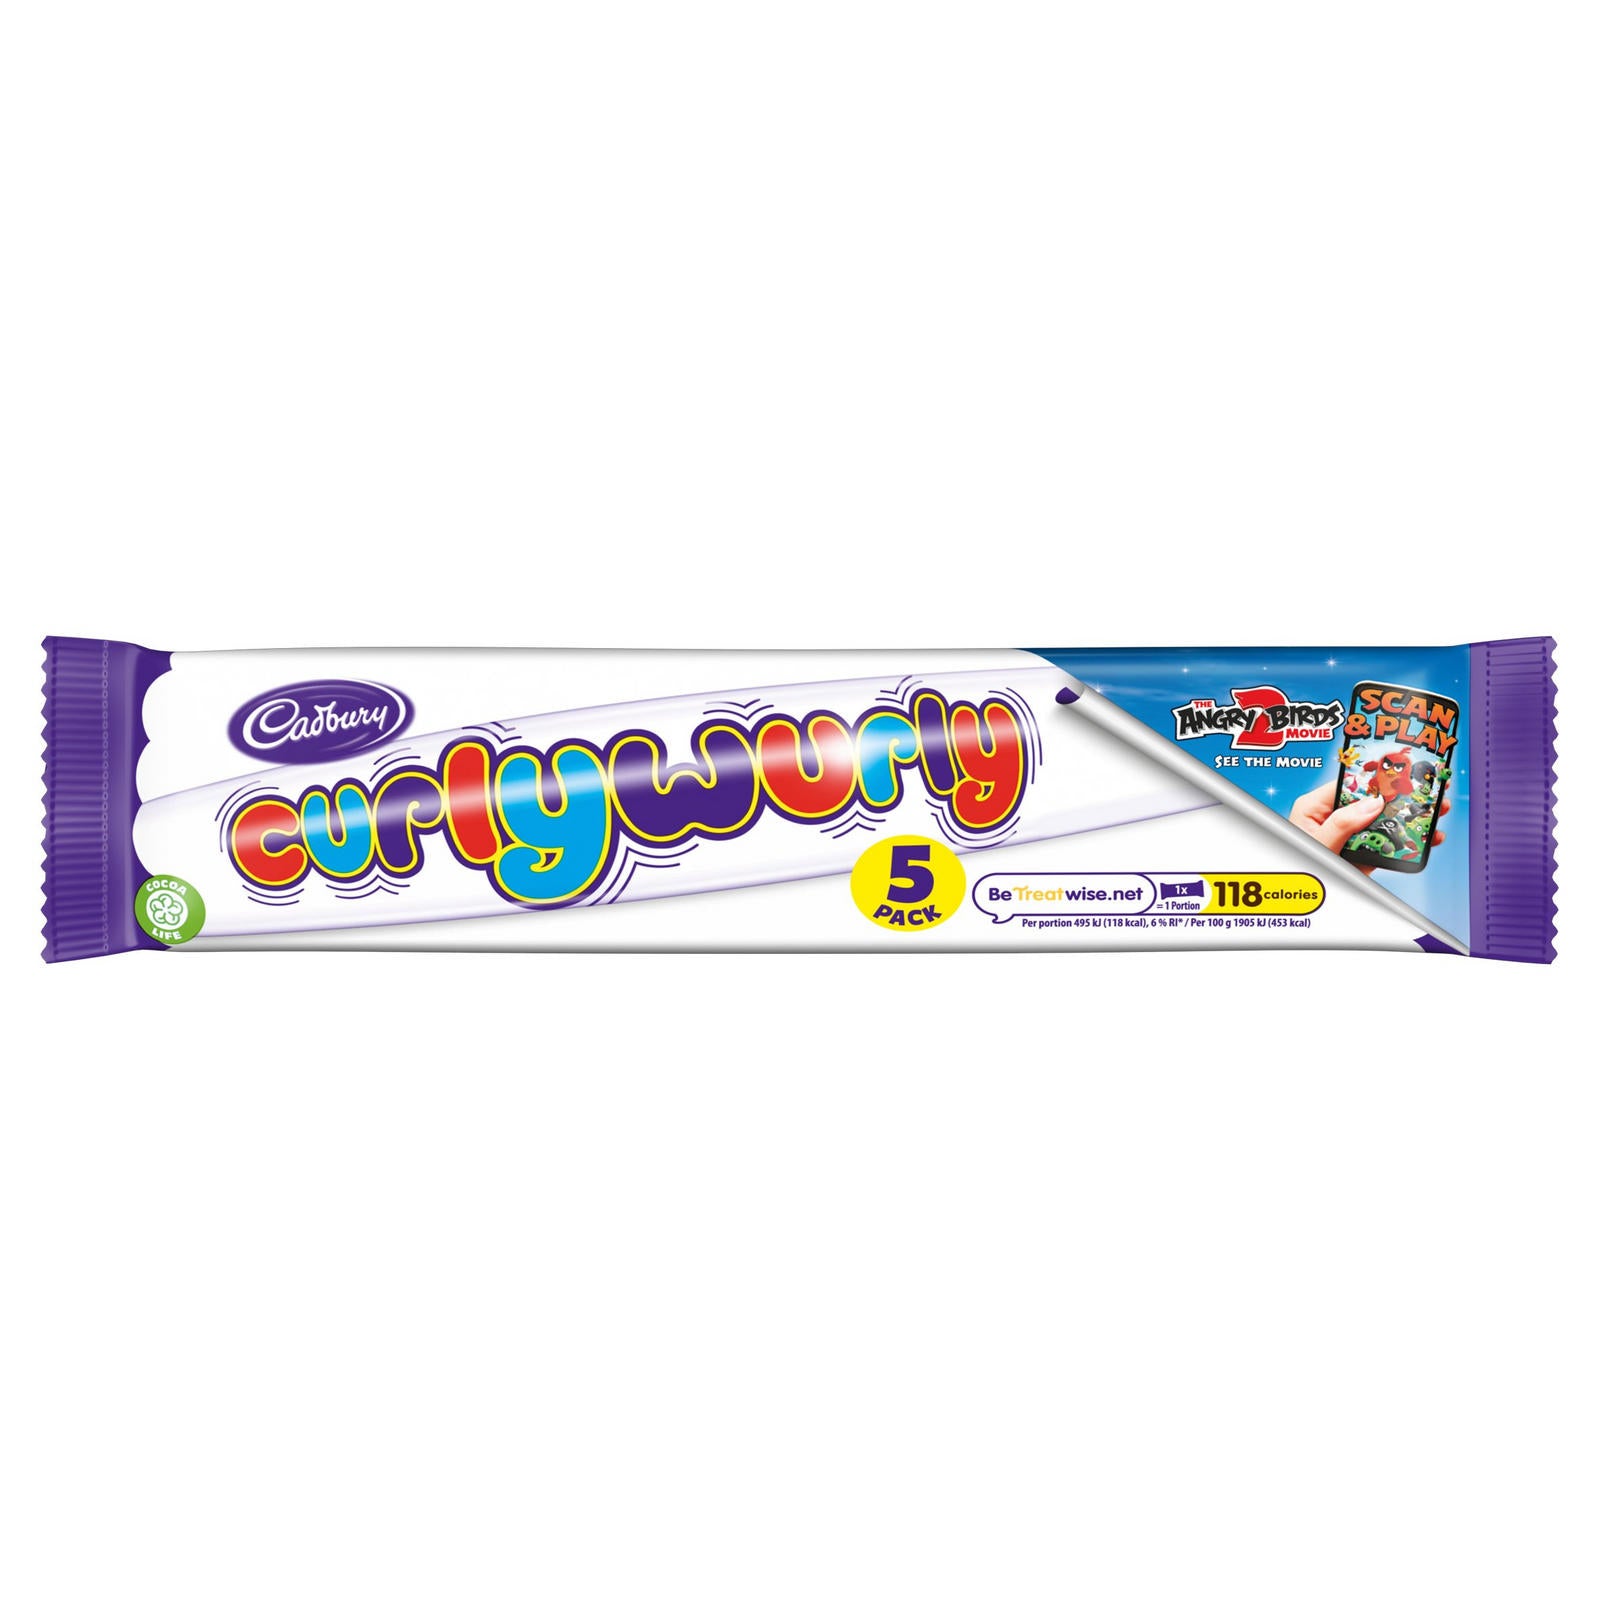 Curly Wurly 5 pack